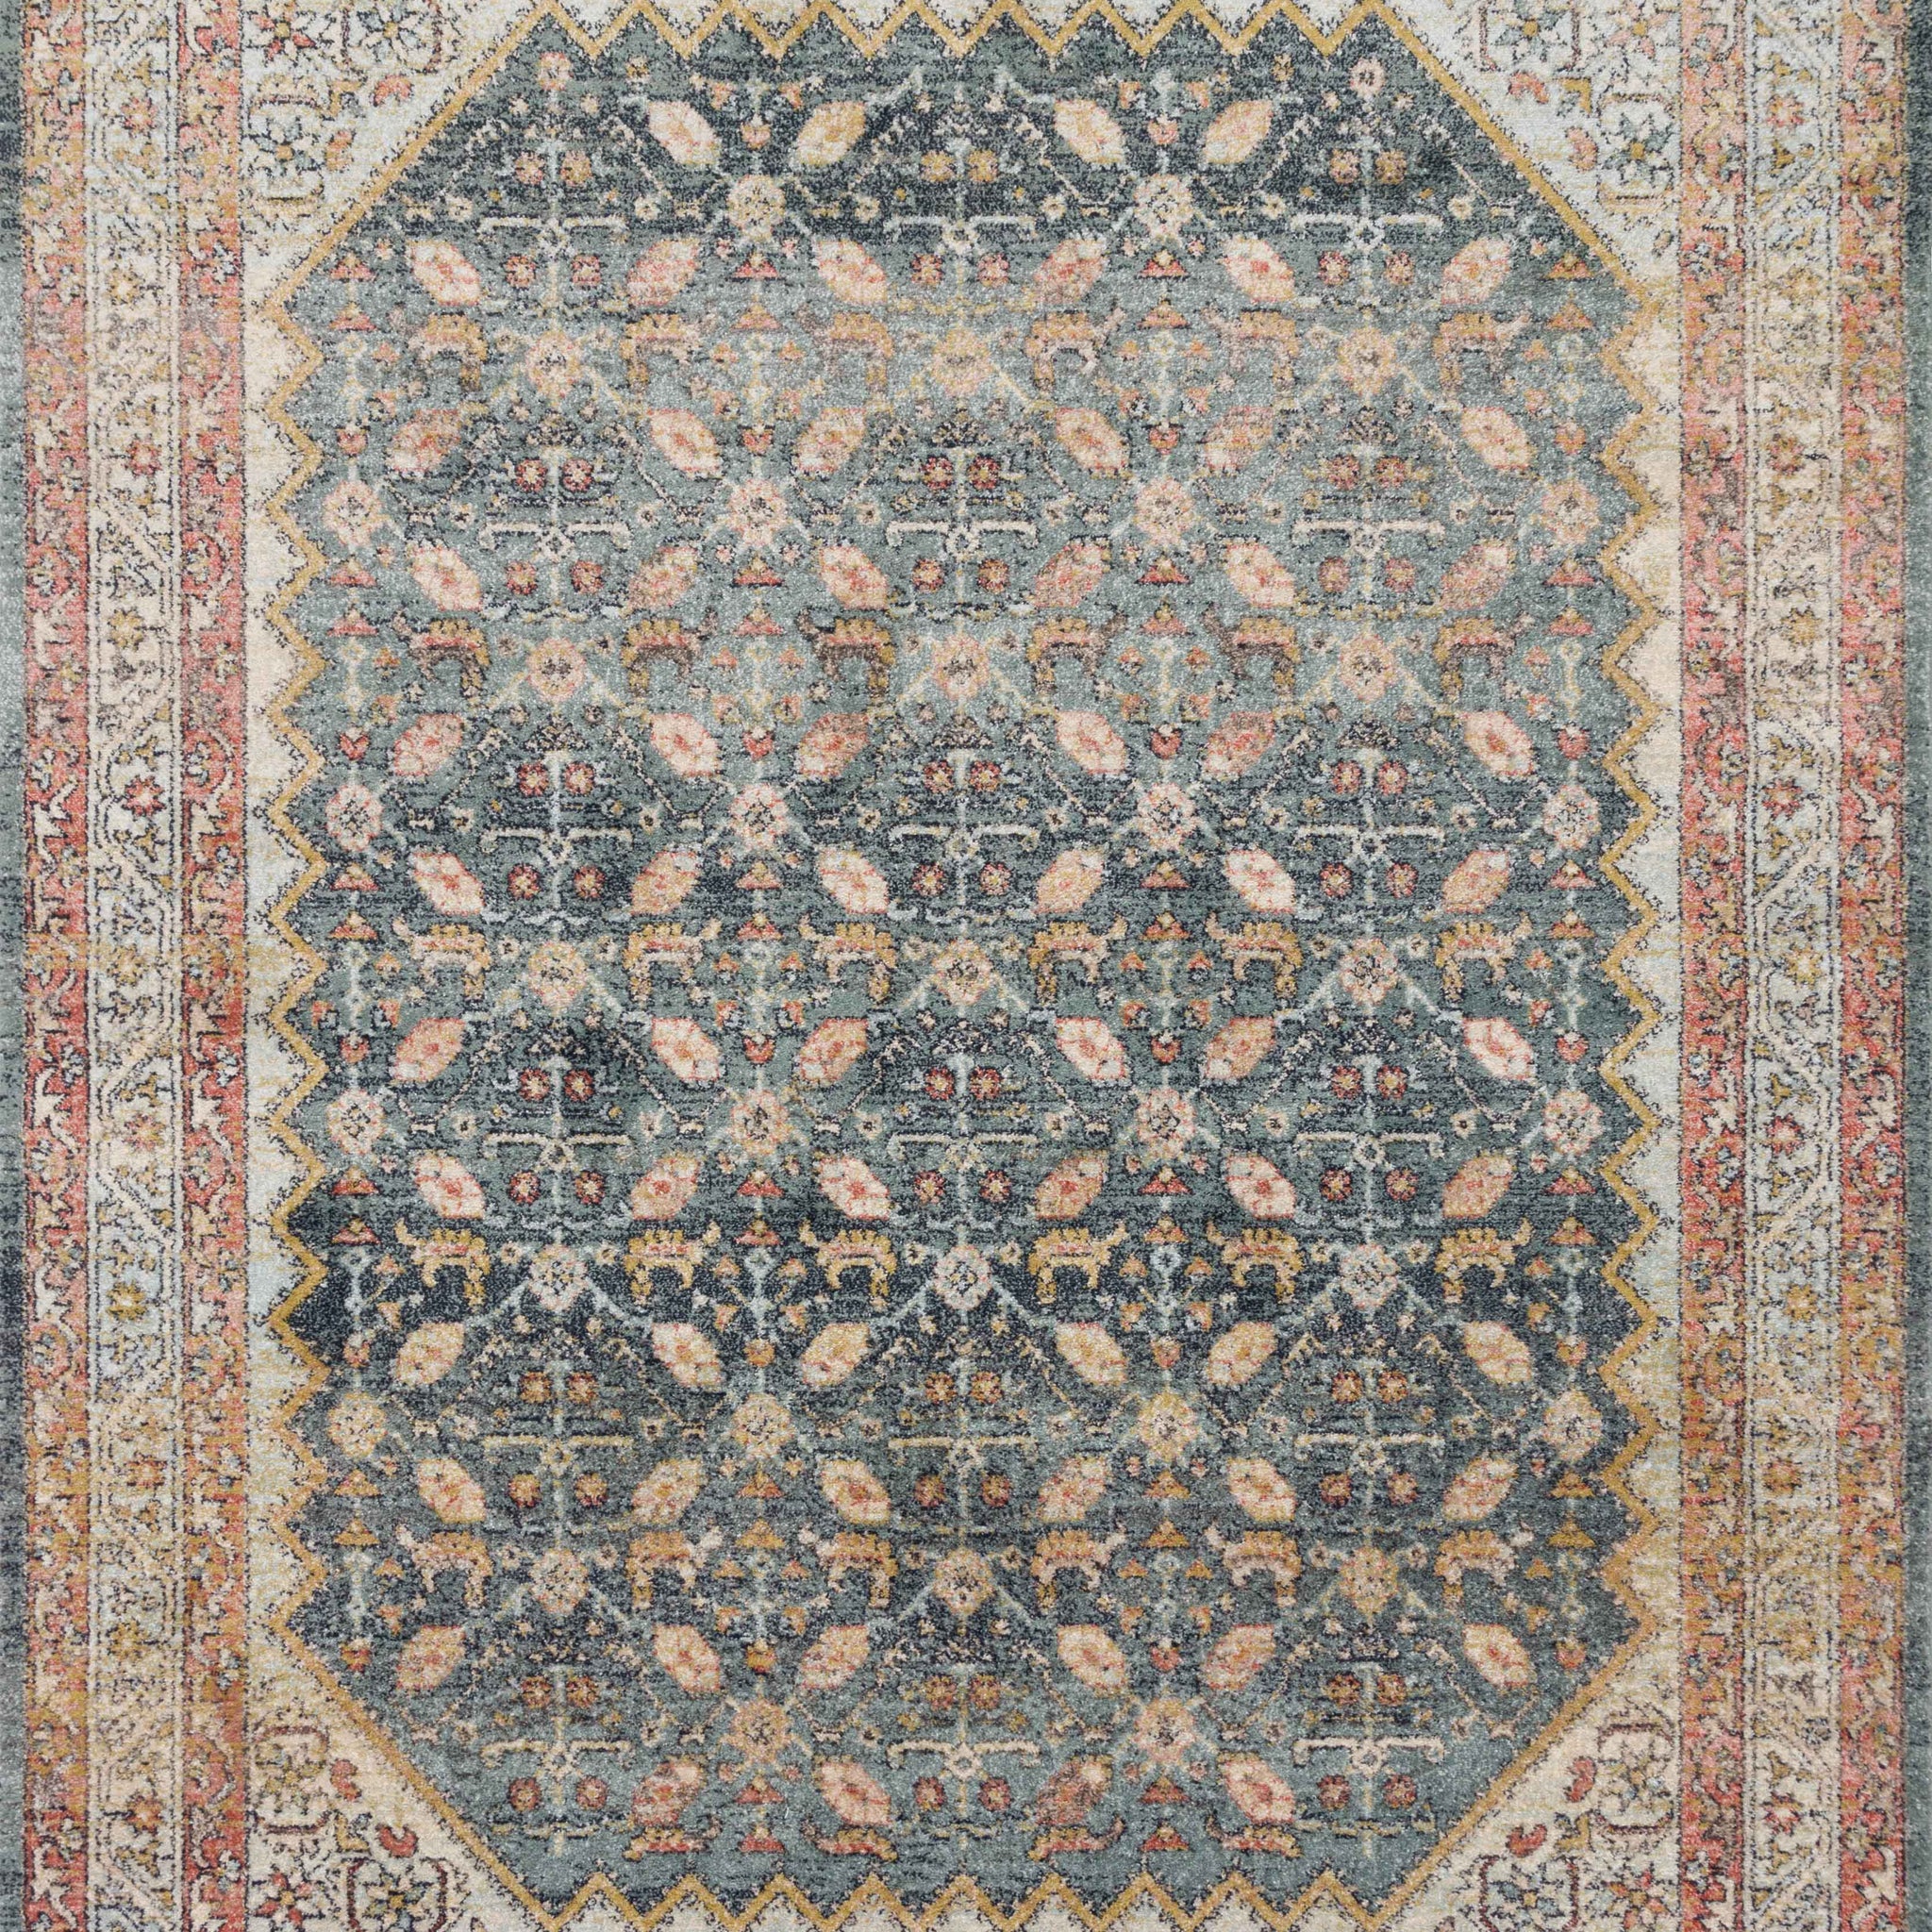 Magnolia Home By Joanna Gaines x Loloi Graham Blue / Persimmon 9'-6" x 12'-6" Area Rug